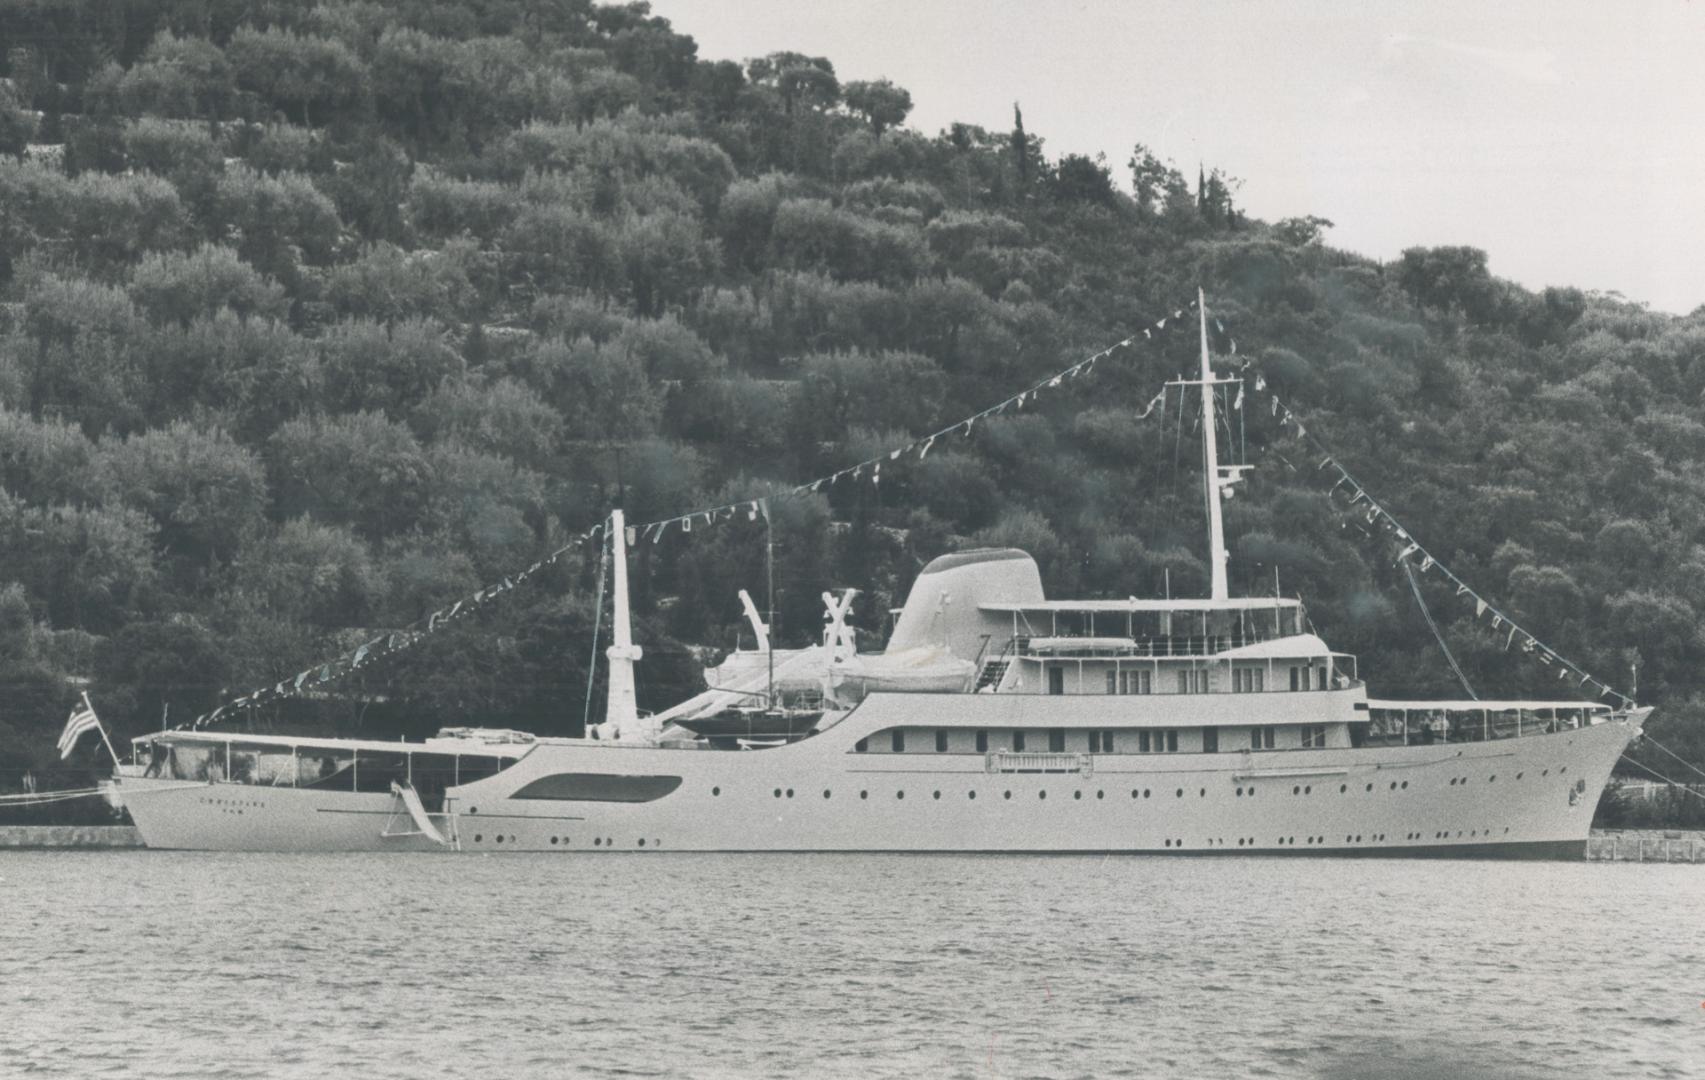 Their objective was the Onassis luxury Yacht Christina off skorpios